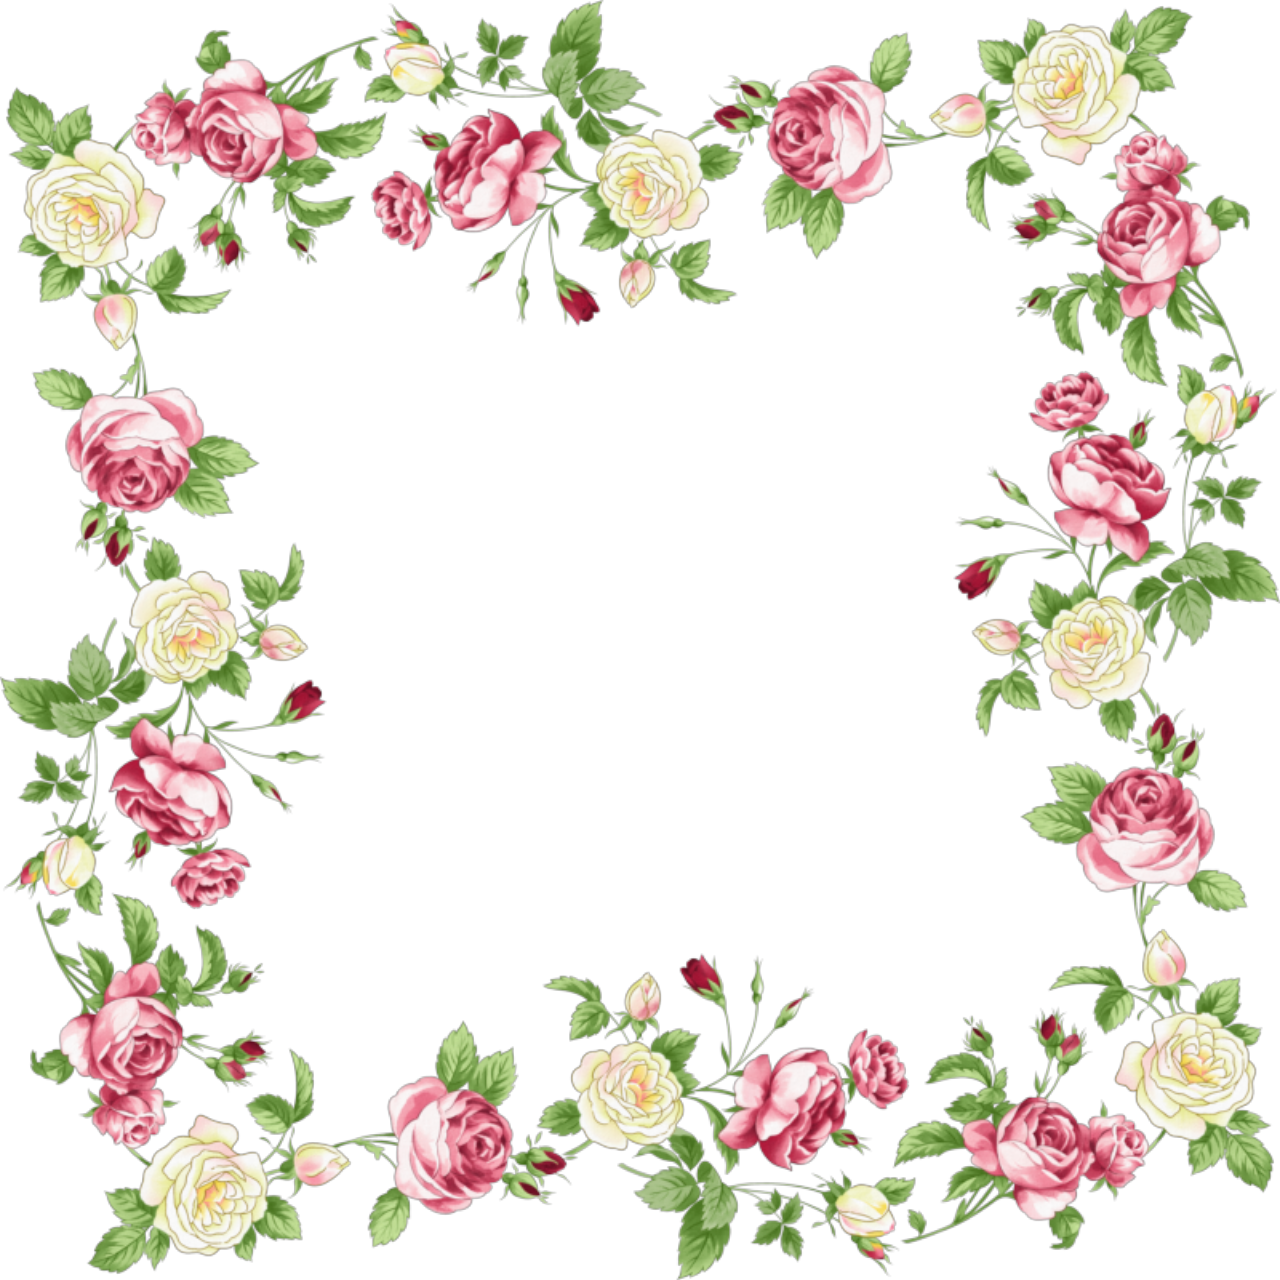 Flowers Borders Png Transparent Flowers Borderspng Images Pluspng